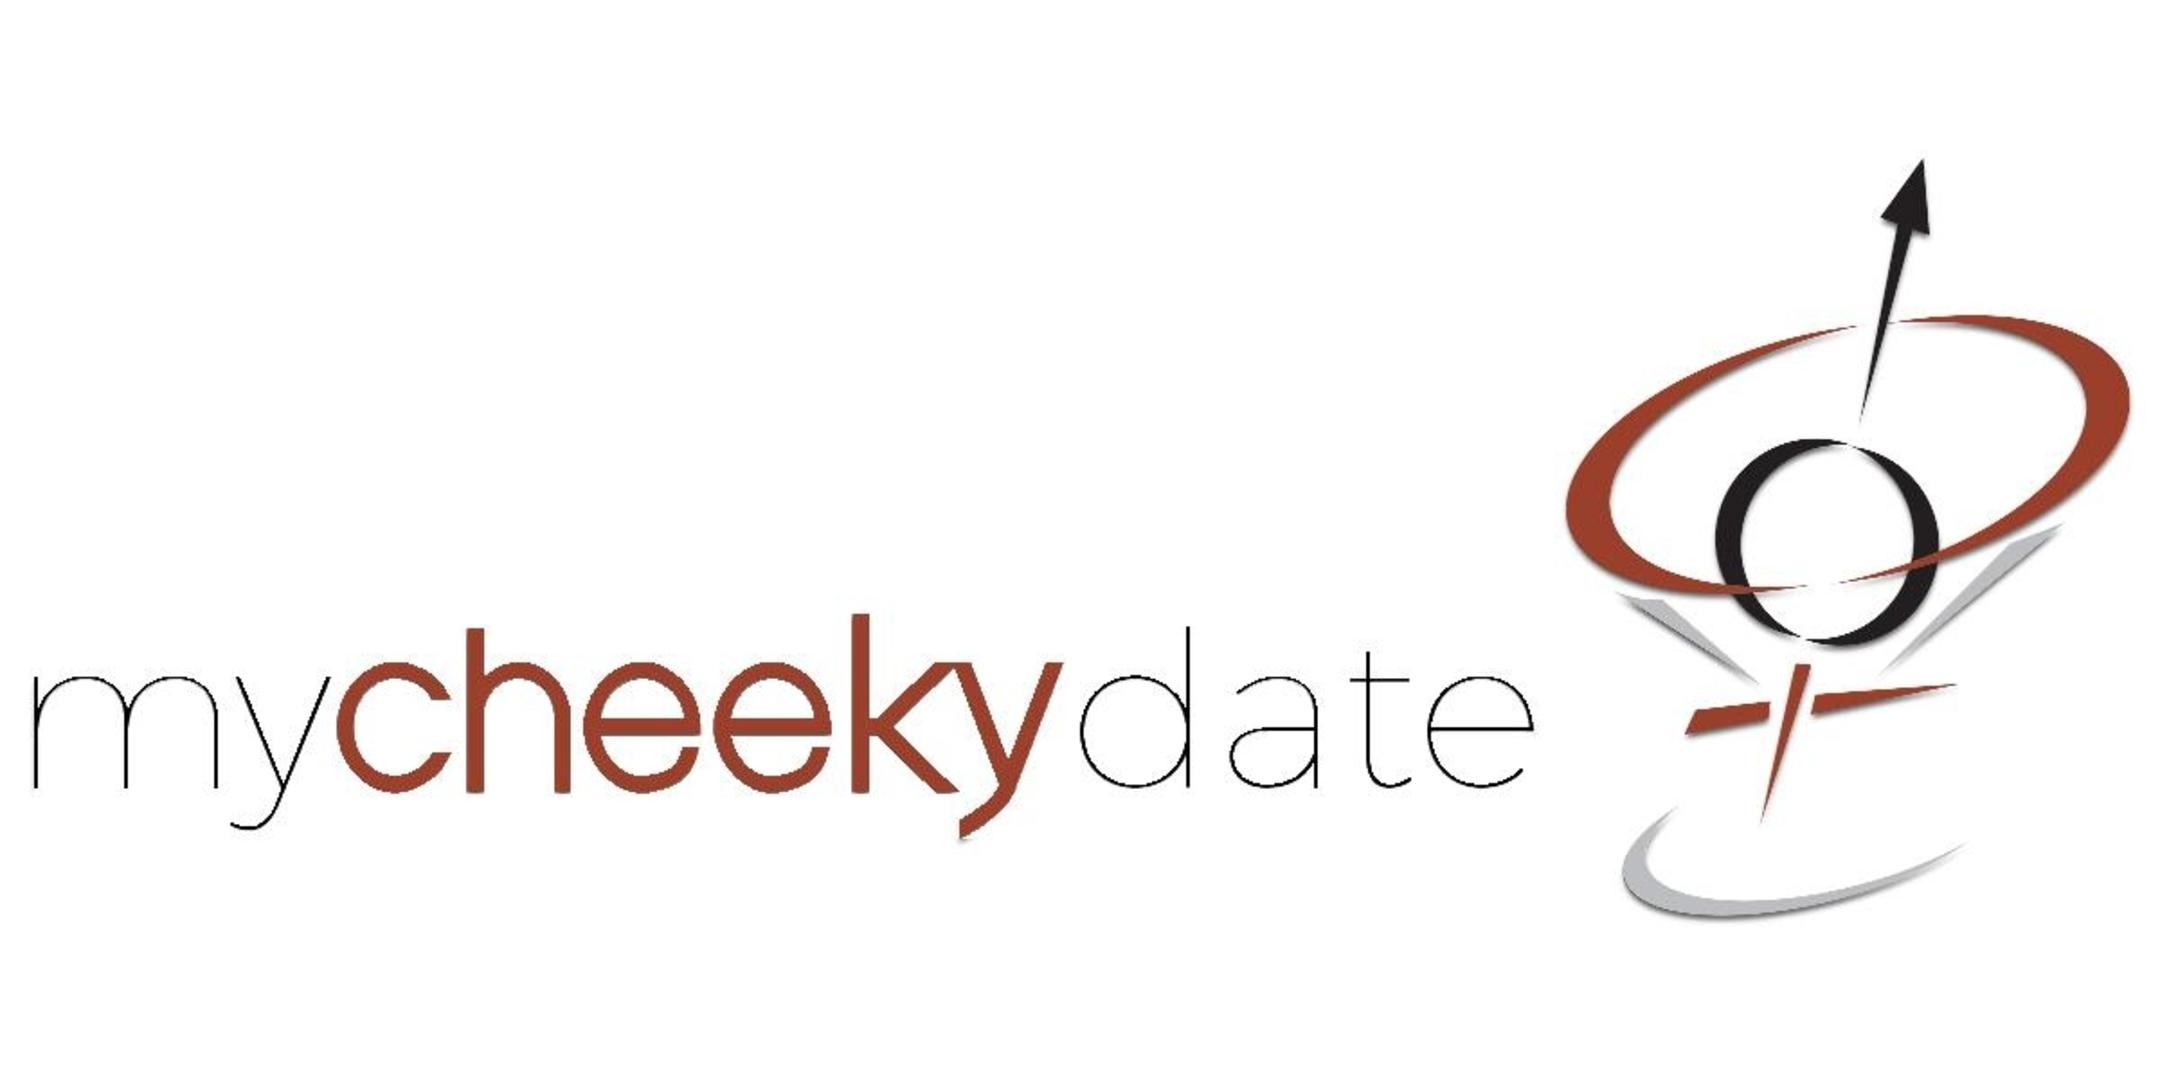 Speed Denver Dating | Friday Night Event for Singles | Let's Get Cheeky!